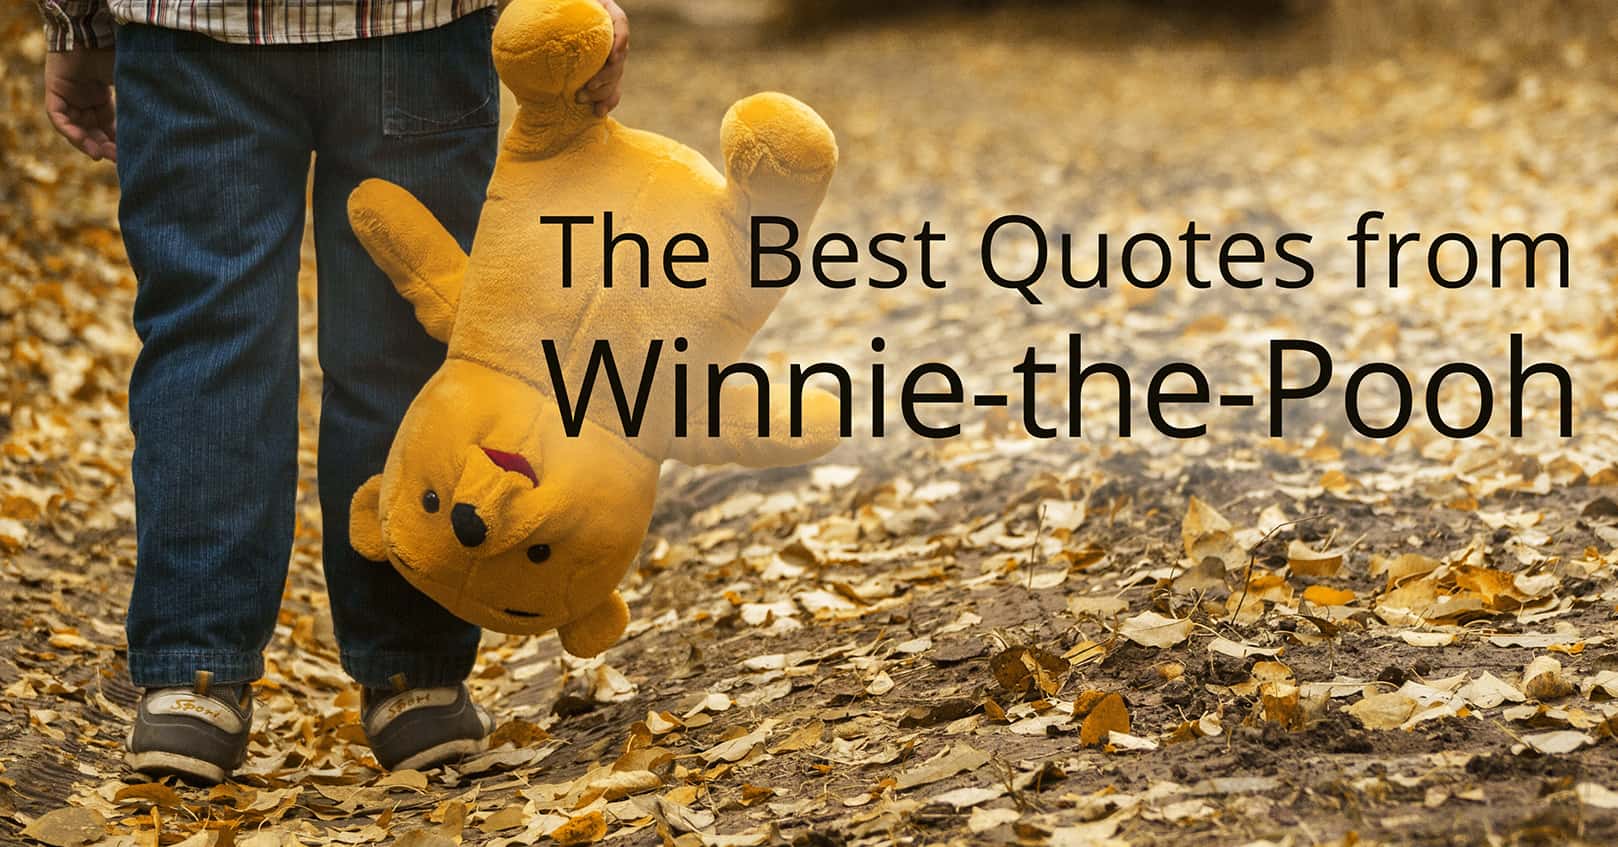 The Best Quotes from Winnie-the-Pooh